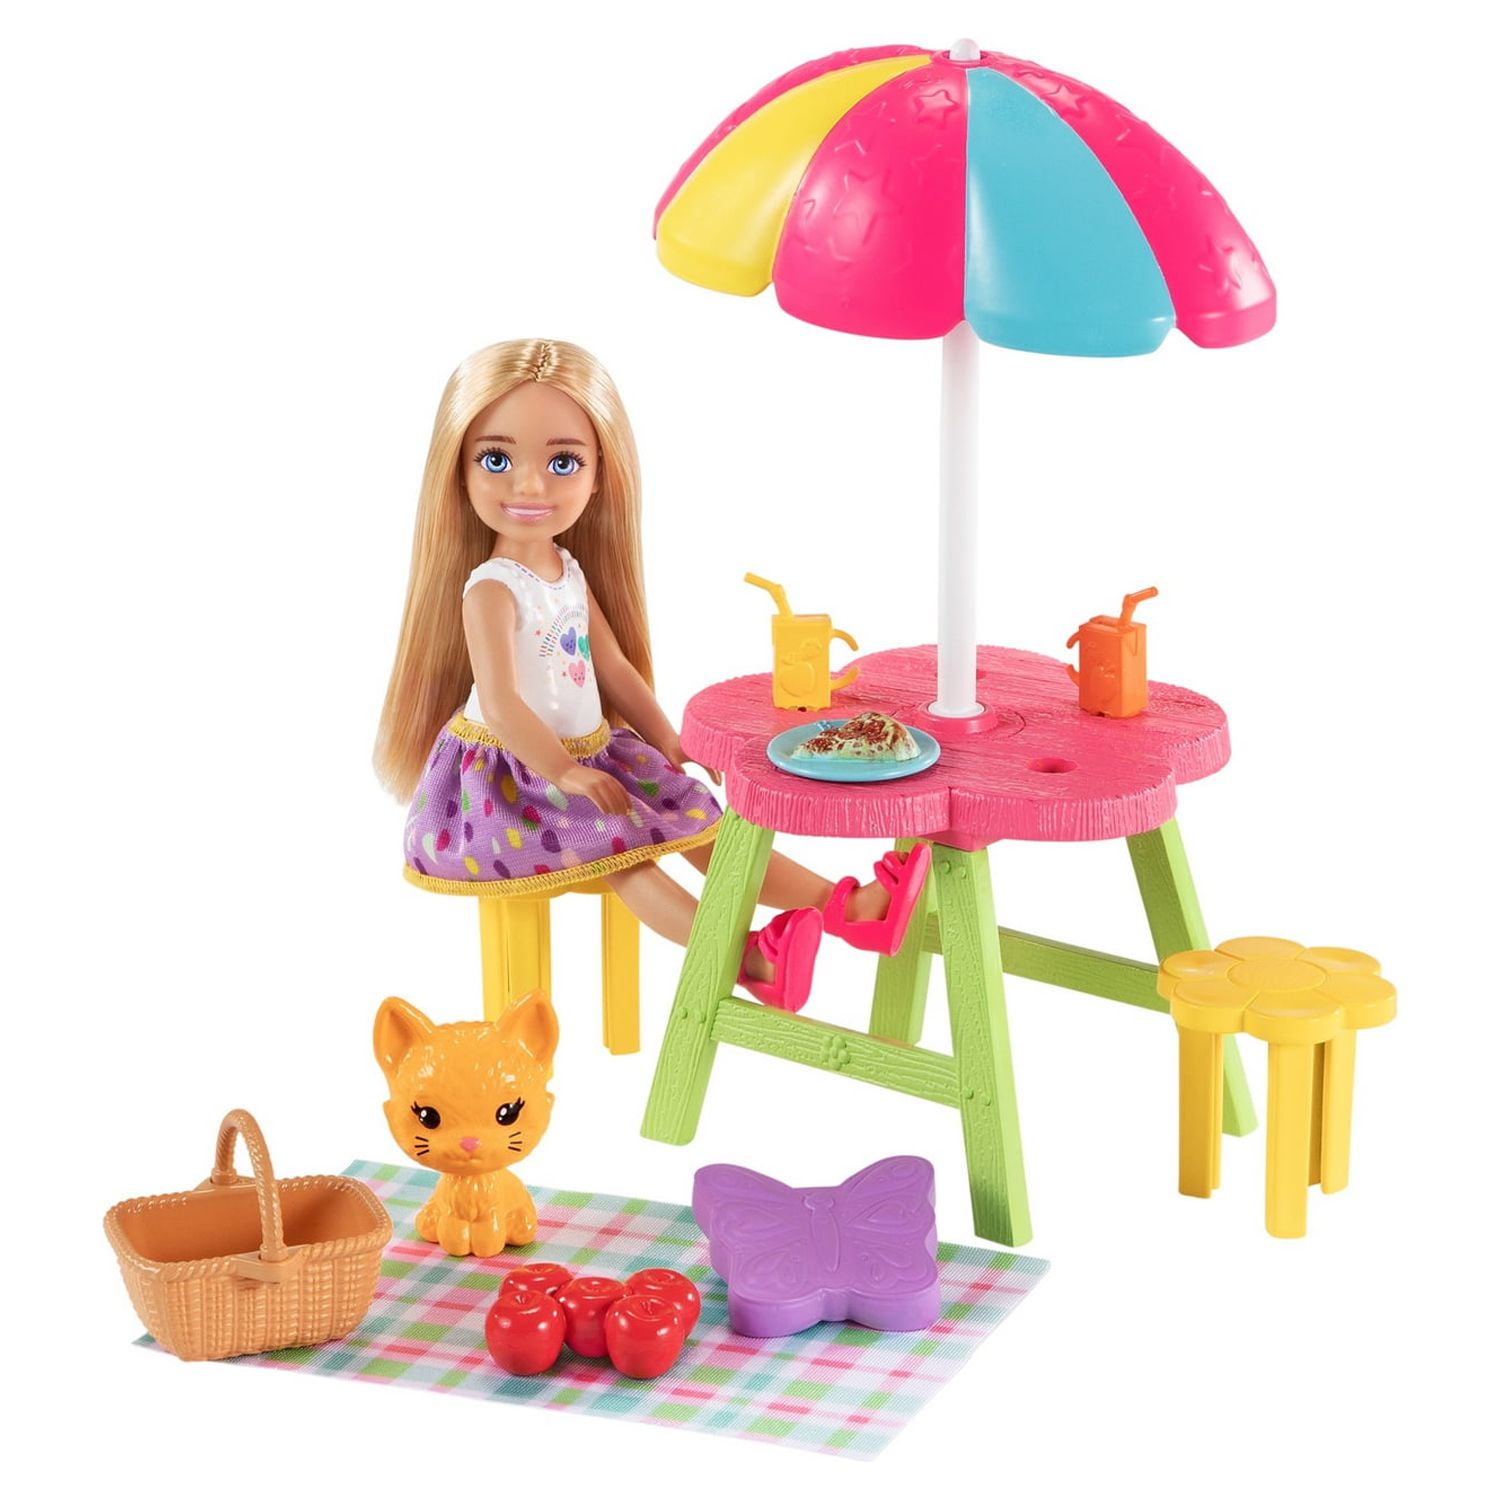 Barbie Clothes, Picnic-themed Fashion And Accessory 2-Pack For Barbie Dolls